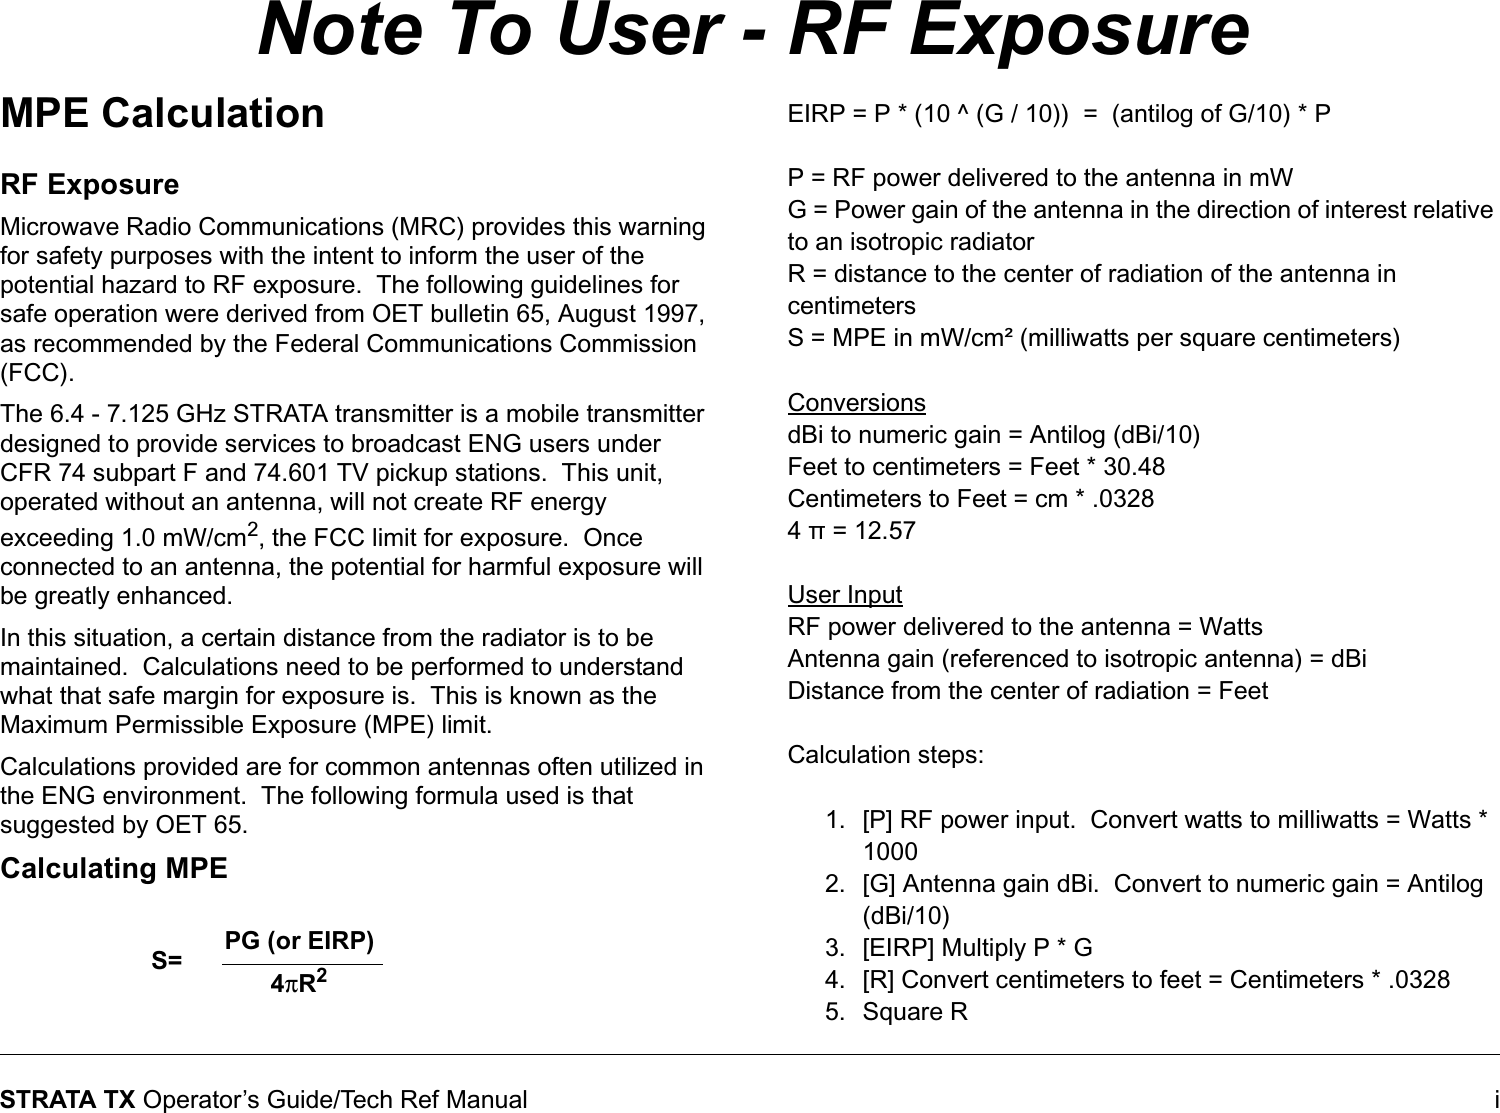  iSTRATA TX Operator’s Guide/Tech Ref ManualNote To User - RF ExposureMPE CalculationRF ExposureMicrowave Radio Communications (MRC) provides this warning for safety purposes with the intent to inform the user of the potential hazard to RF exposure.  The following guidelines for safe operation were derived from OET bulletin 65, August 1997, as recommended by the Federal Communications Commission (FCC).The 6.4 - 7.125 GHz STRATA transmitter is a mobile transmitter designed to provide services to broadcast ENG users under CFR 74 subpart F and 74.601 TV pickup stations.  This unit, operated without an antenna, will not create RF energy exceeding 1.0 mW/cm2, the FCC limit for exposure.  Once connected to an antenna, the potential for harmful exposure will be greatly enhanced.In this situation, a certain distance from the radiator is to be maintained.  Calculations need to be performed to understand what that safe margin for exposure is.  This is known as the Maximum Permissible Exposure (MPE) limit.Calculations provided are for common antennas often utilized in the ENG environment.  The following formula used is that suggested by OET 65.Calculating MPEEIRP = P * (10 ^ (G / 10))  =  (antilog of G/10) * PP = RF power delivered to the antenna in mWG = Power gain of the antenna in the direction of interest relative to an isotropic radiatorR = distance to the center of radiation of the antenna in centimetersS = MPE in mW/cm² (milliwatts per square centimeters)ConversionsdBi to numeric gain = Antilog (dBi/10)Feet to centimeters = Feet * 30.48Centimeters to Feet = cm * .03284 π = 12.57User InputRF power delivered to the antenna = WattsAntenna gain (referenced to isotropic antenna) = dBiDistance from the center of radiation = FeetCalculation steps:1. [P] RF power input.  Convert watts to milliwatts = Watts * 10002. [G] Antenna gain dBi.  Convert to numeric gain = Antilog (dBi/10)3. [EIRP] Multiply P * G 4. [R] Convert centimeters to feet = Centimeters * .03285. Square RPG (or EIRP)S= 4πR2